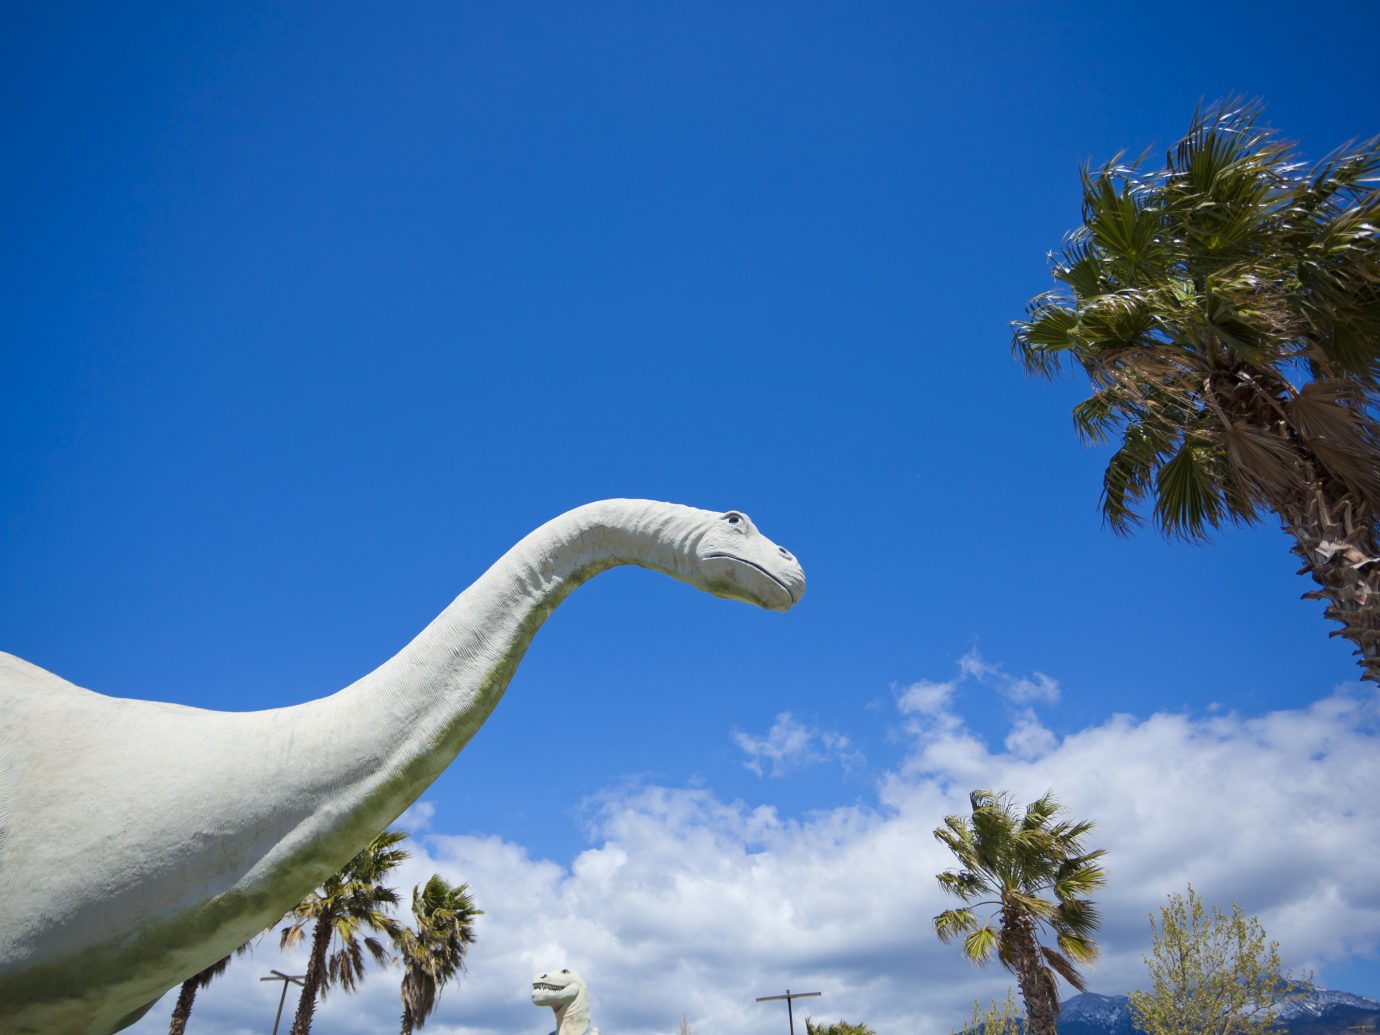 Cabazon Dinosaurs outside Palm Springs